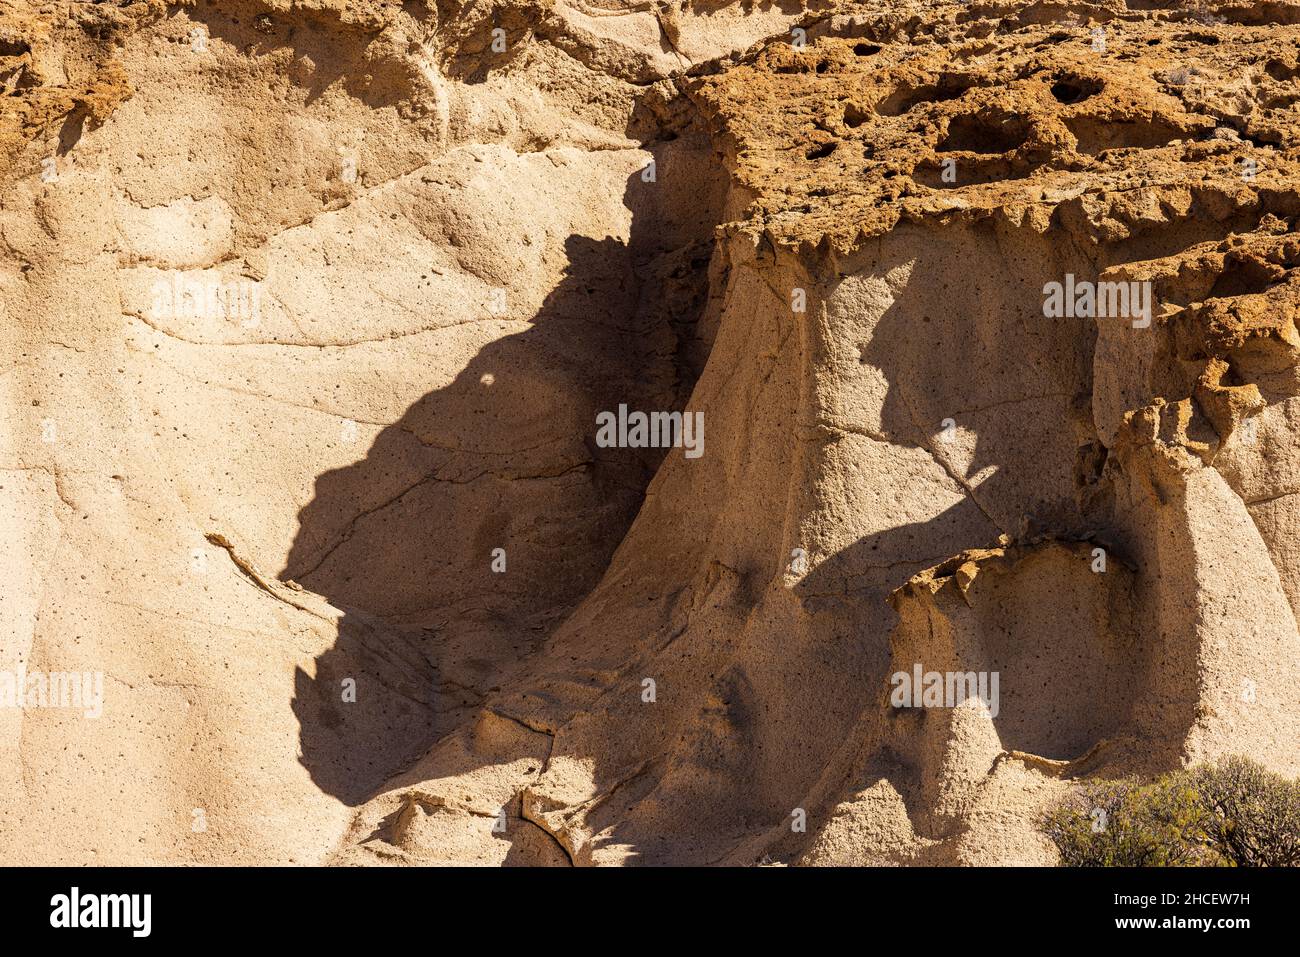 Big cat shadow formed by rock shapes in an area of wind eroded pumice stone known as the Natural monument of Los Derriscaderos in Granadilla, Tenerife Stock Photo